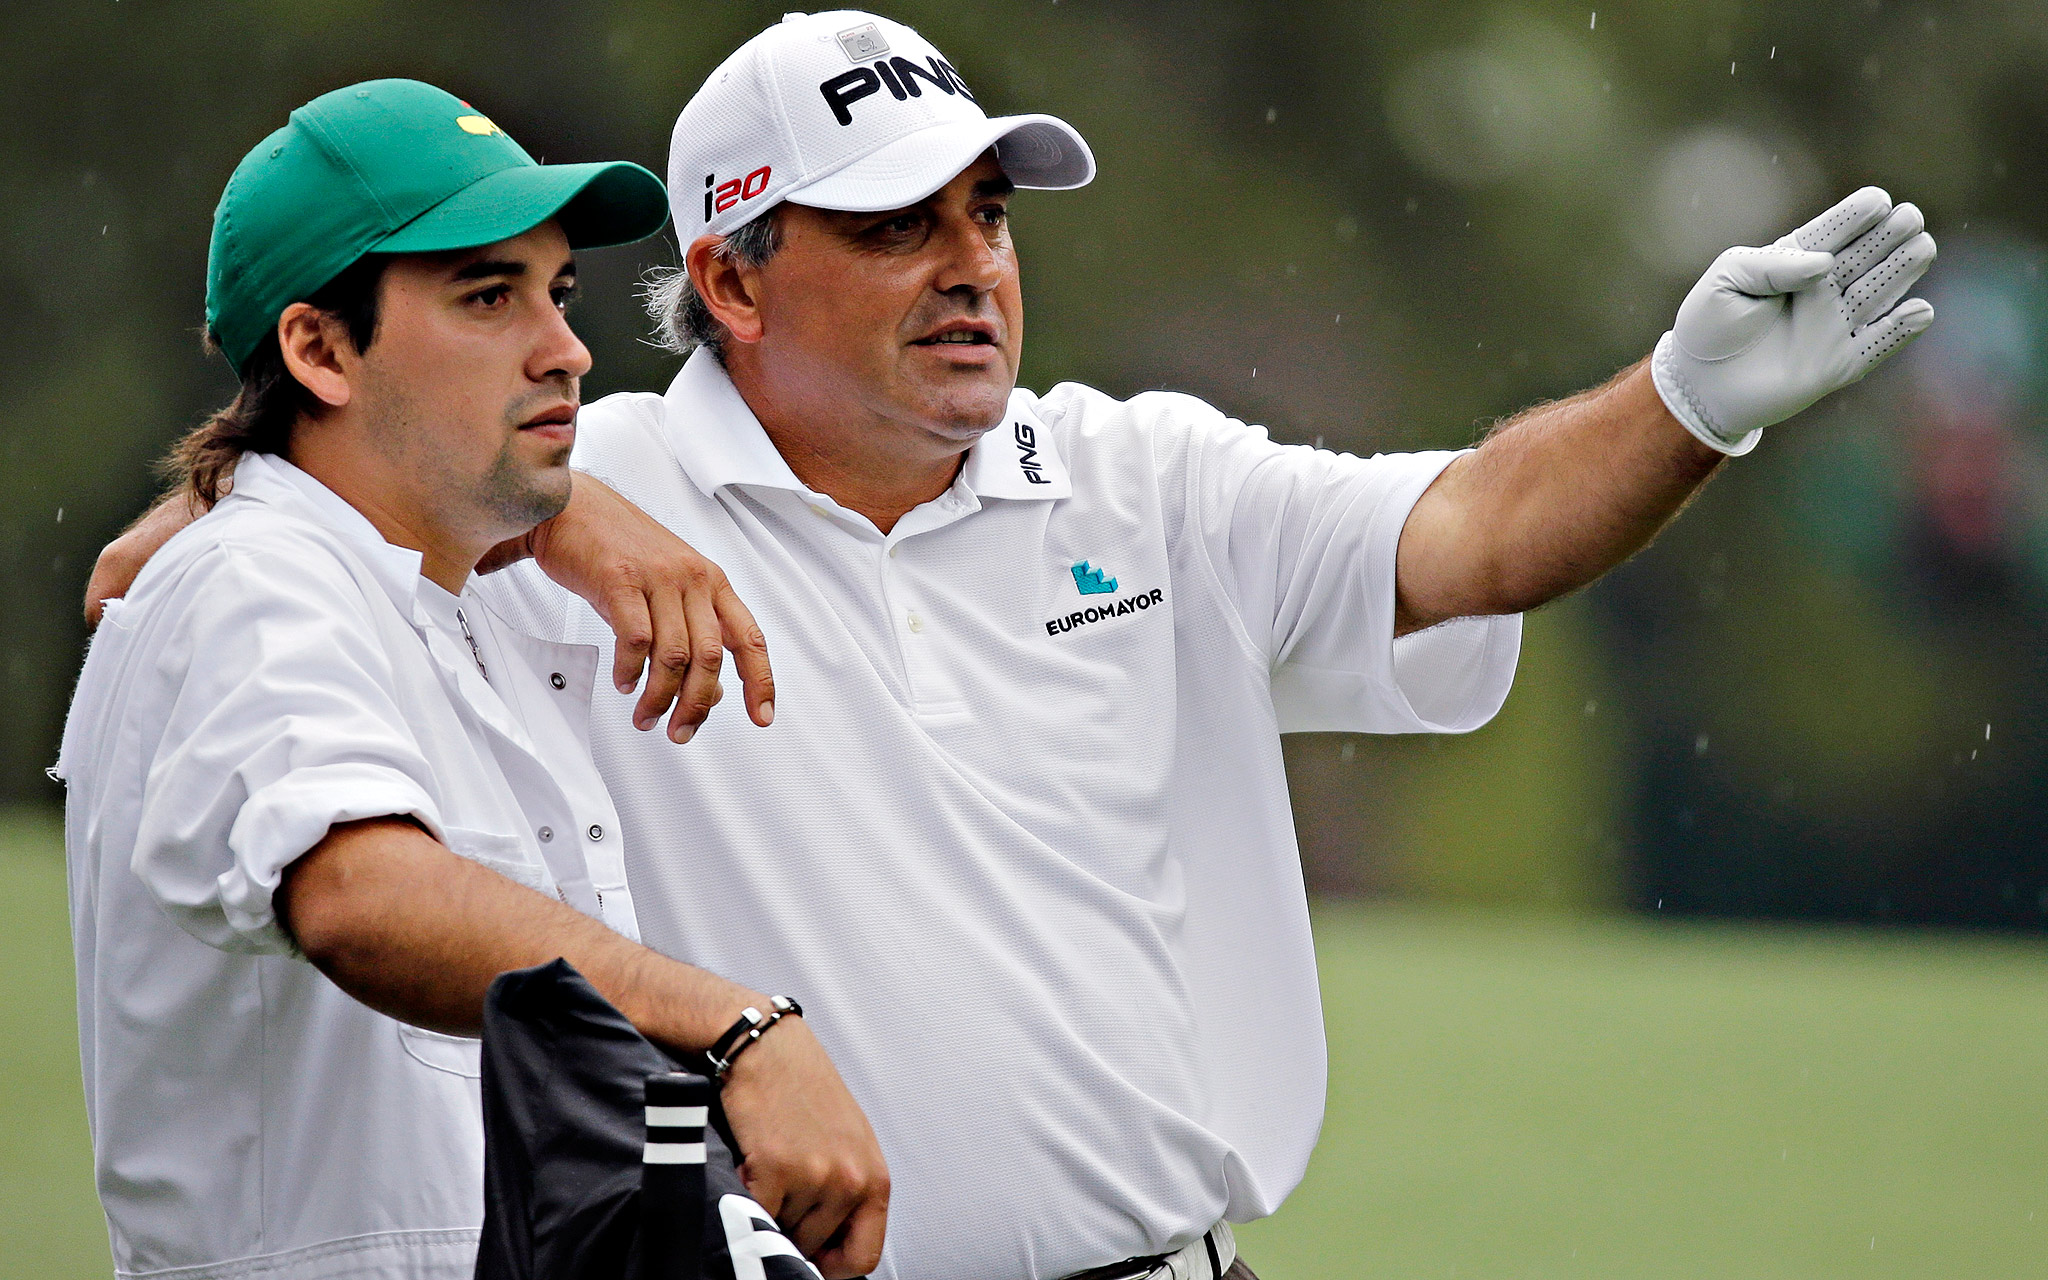 Angel Cabrera Sends A Message To The Champions Tour